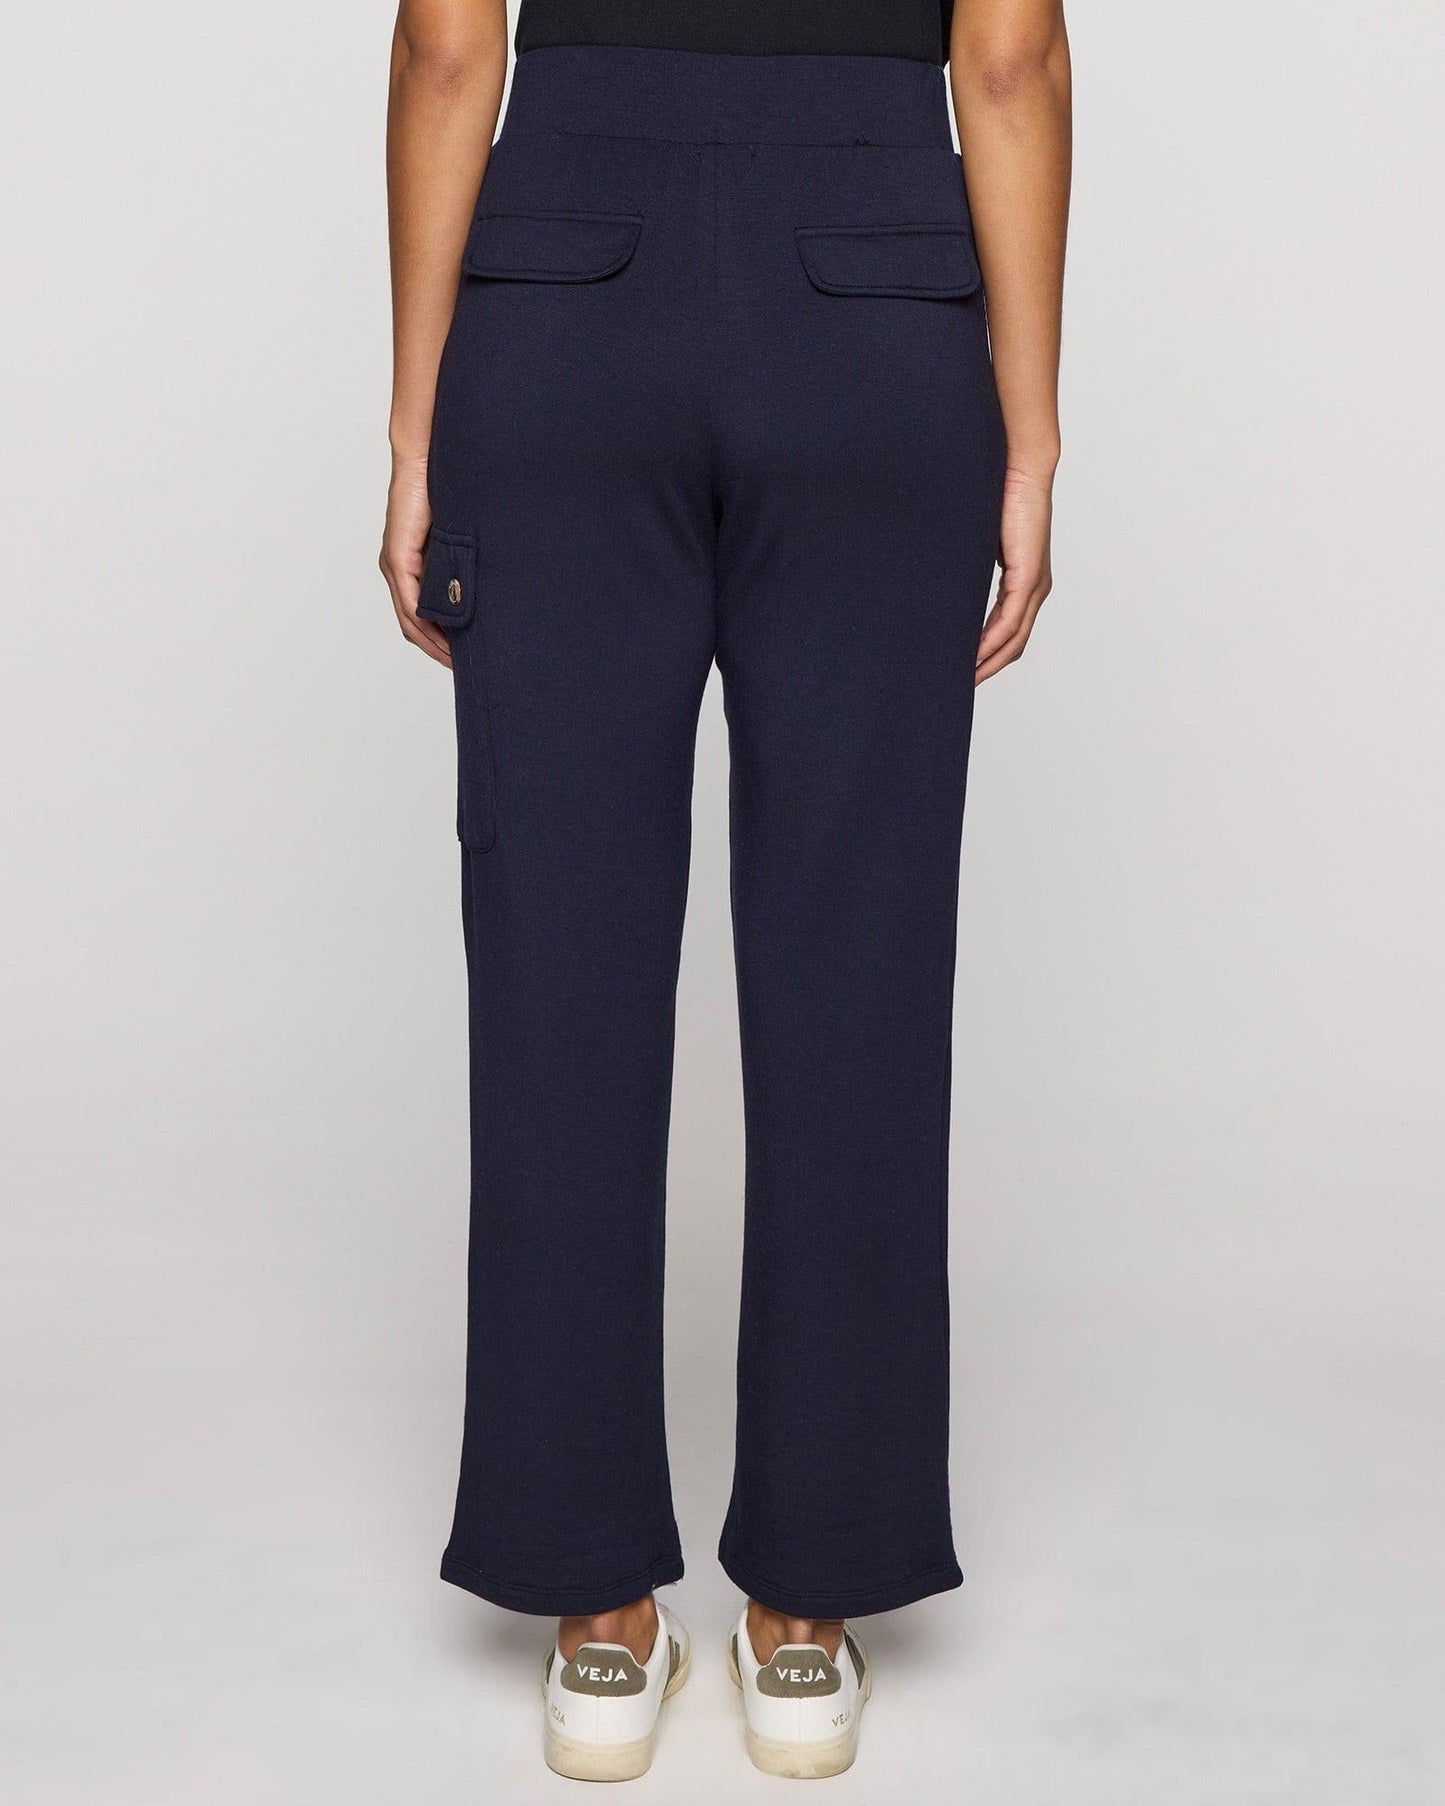 Navy | Cargo Pant Rear View